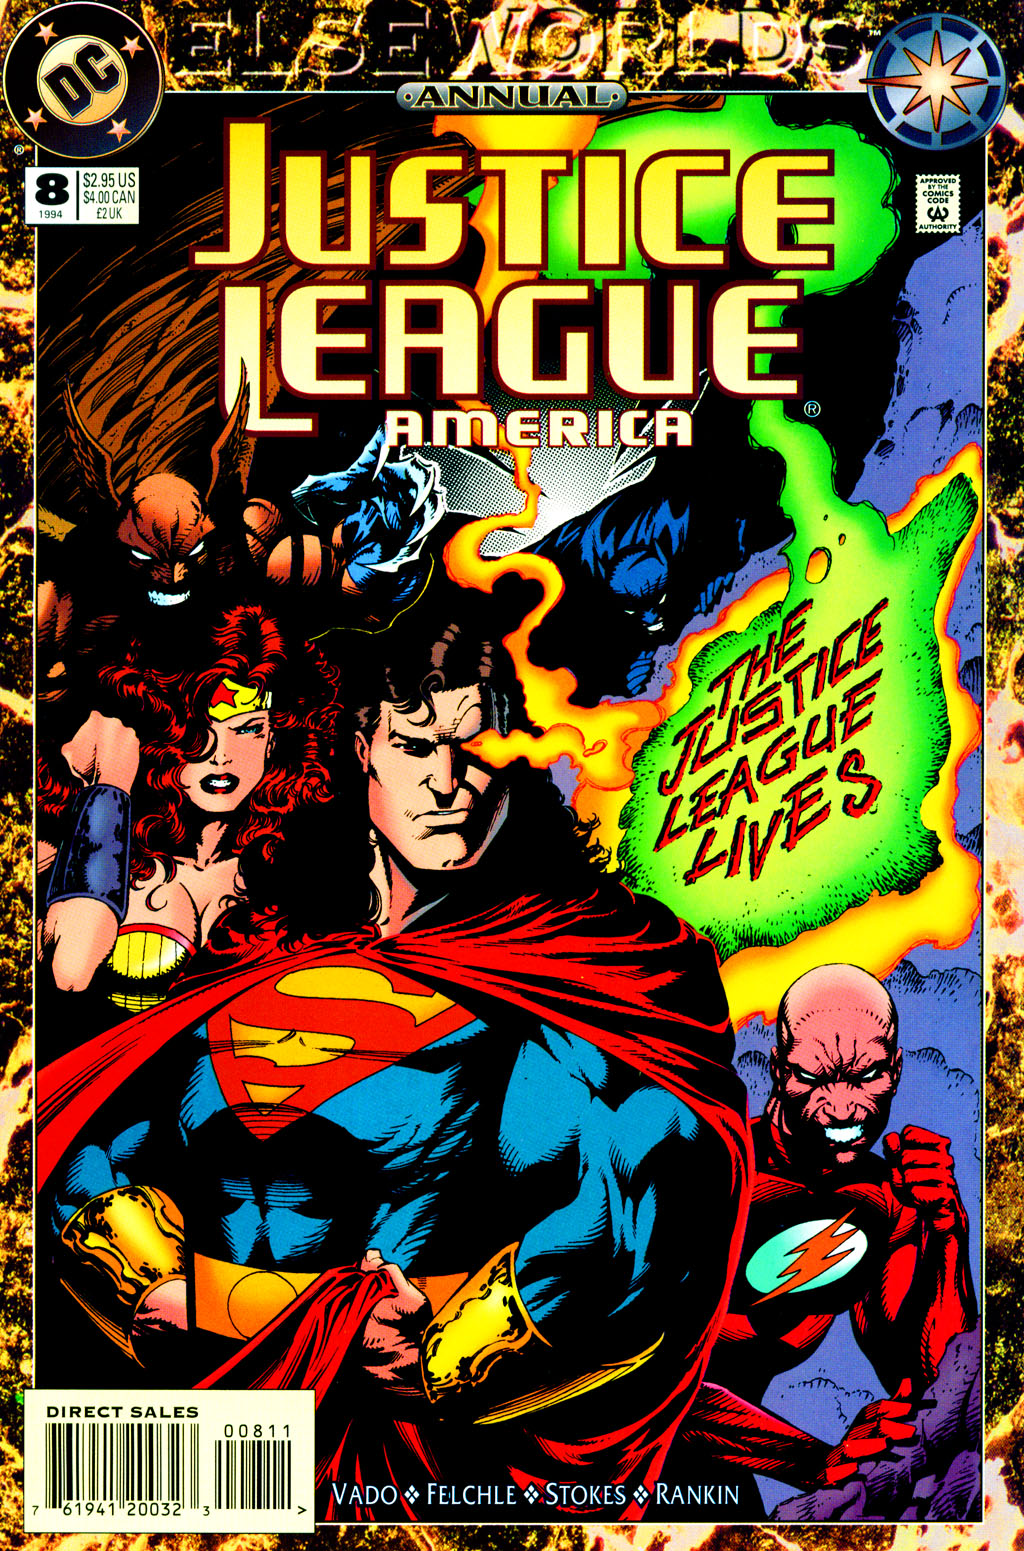 Read online Justice League America comic -  Issue # _Annual 8 - 1